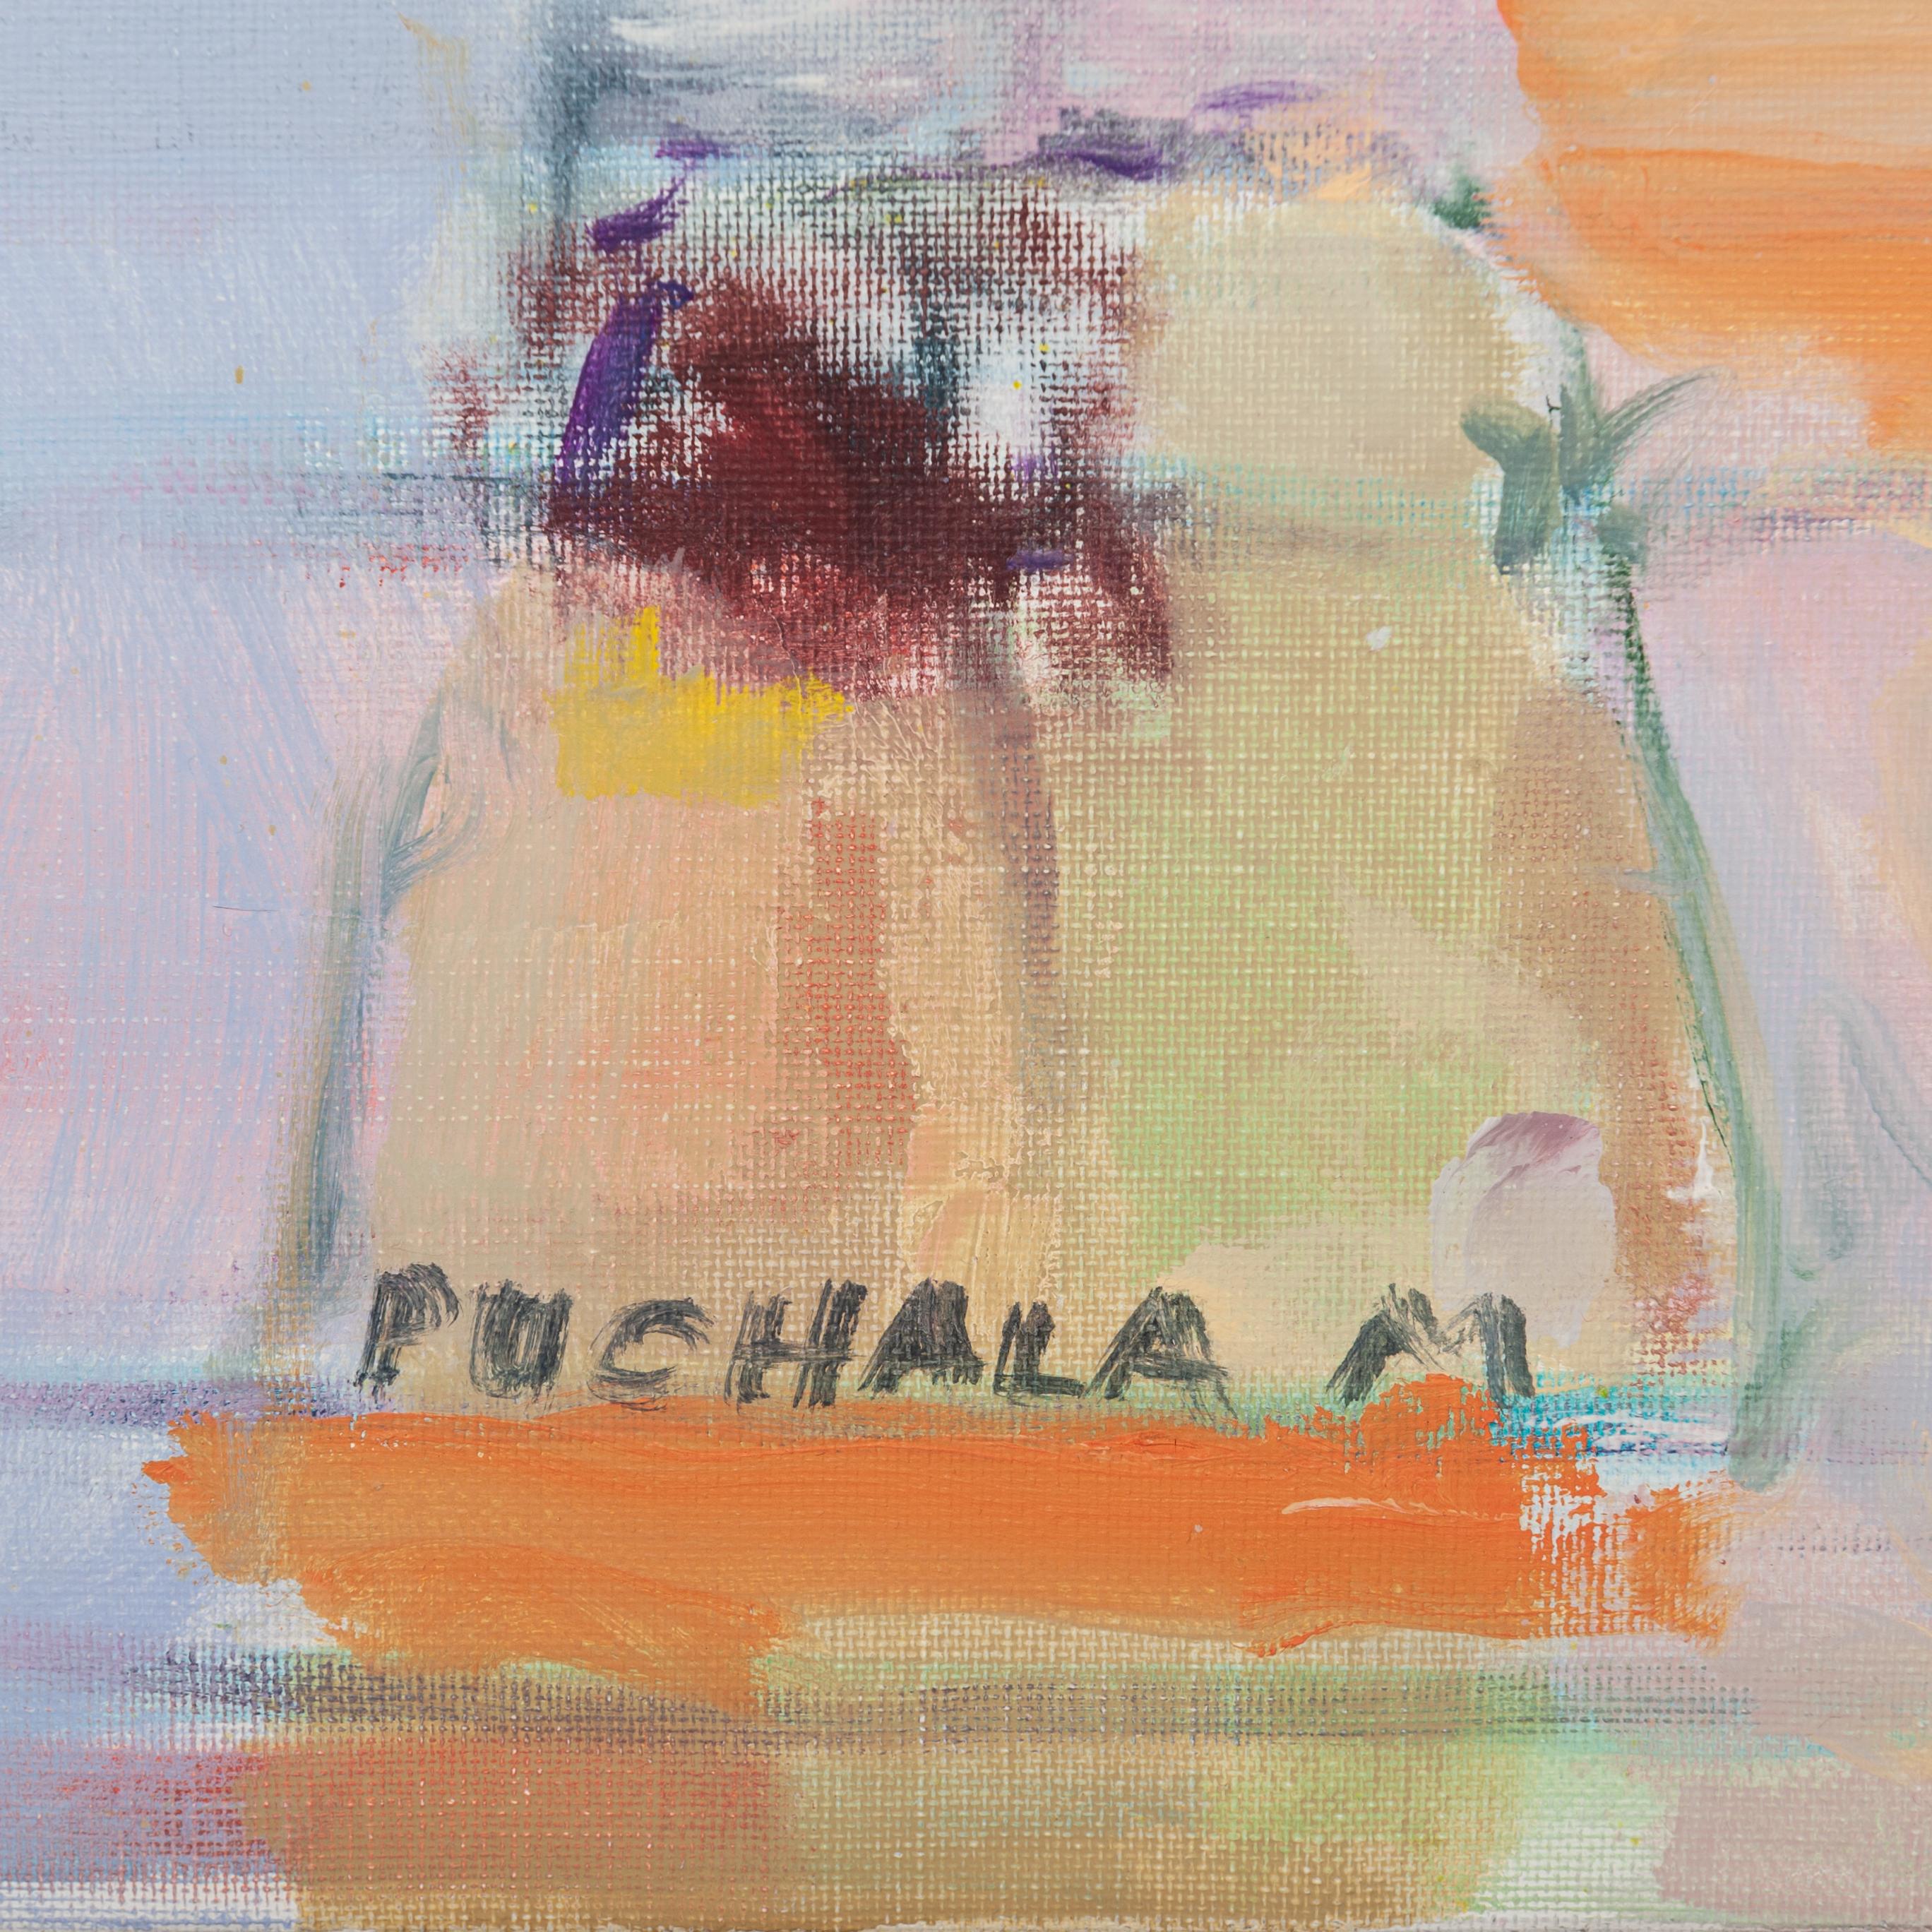 Abstract painting in warm, friendly acrylic colors with the name 